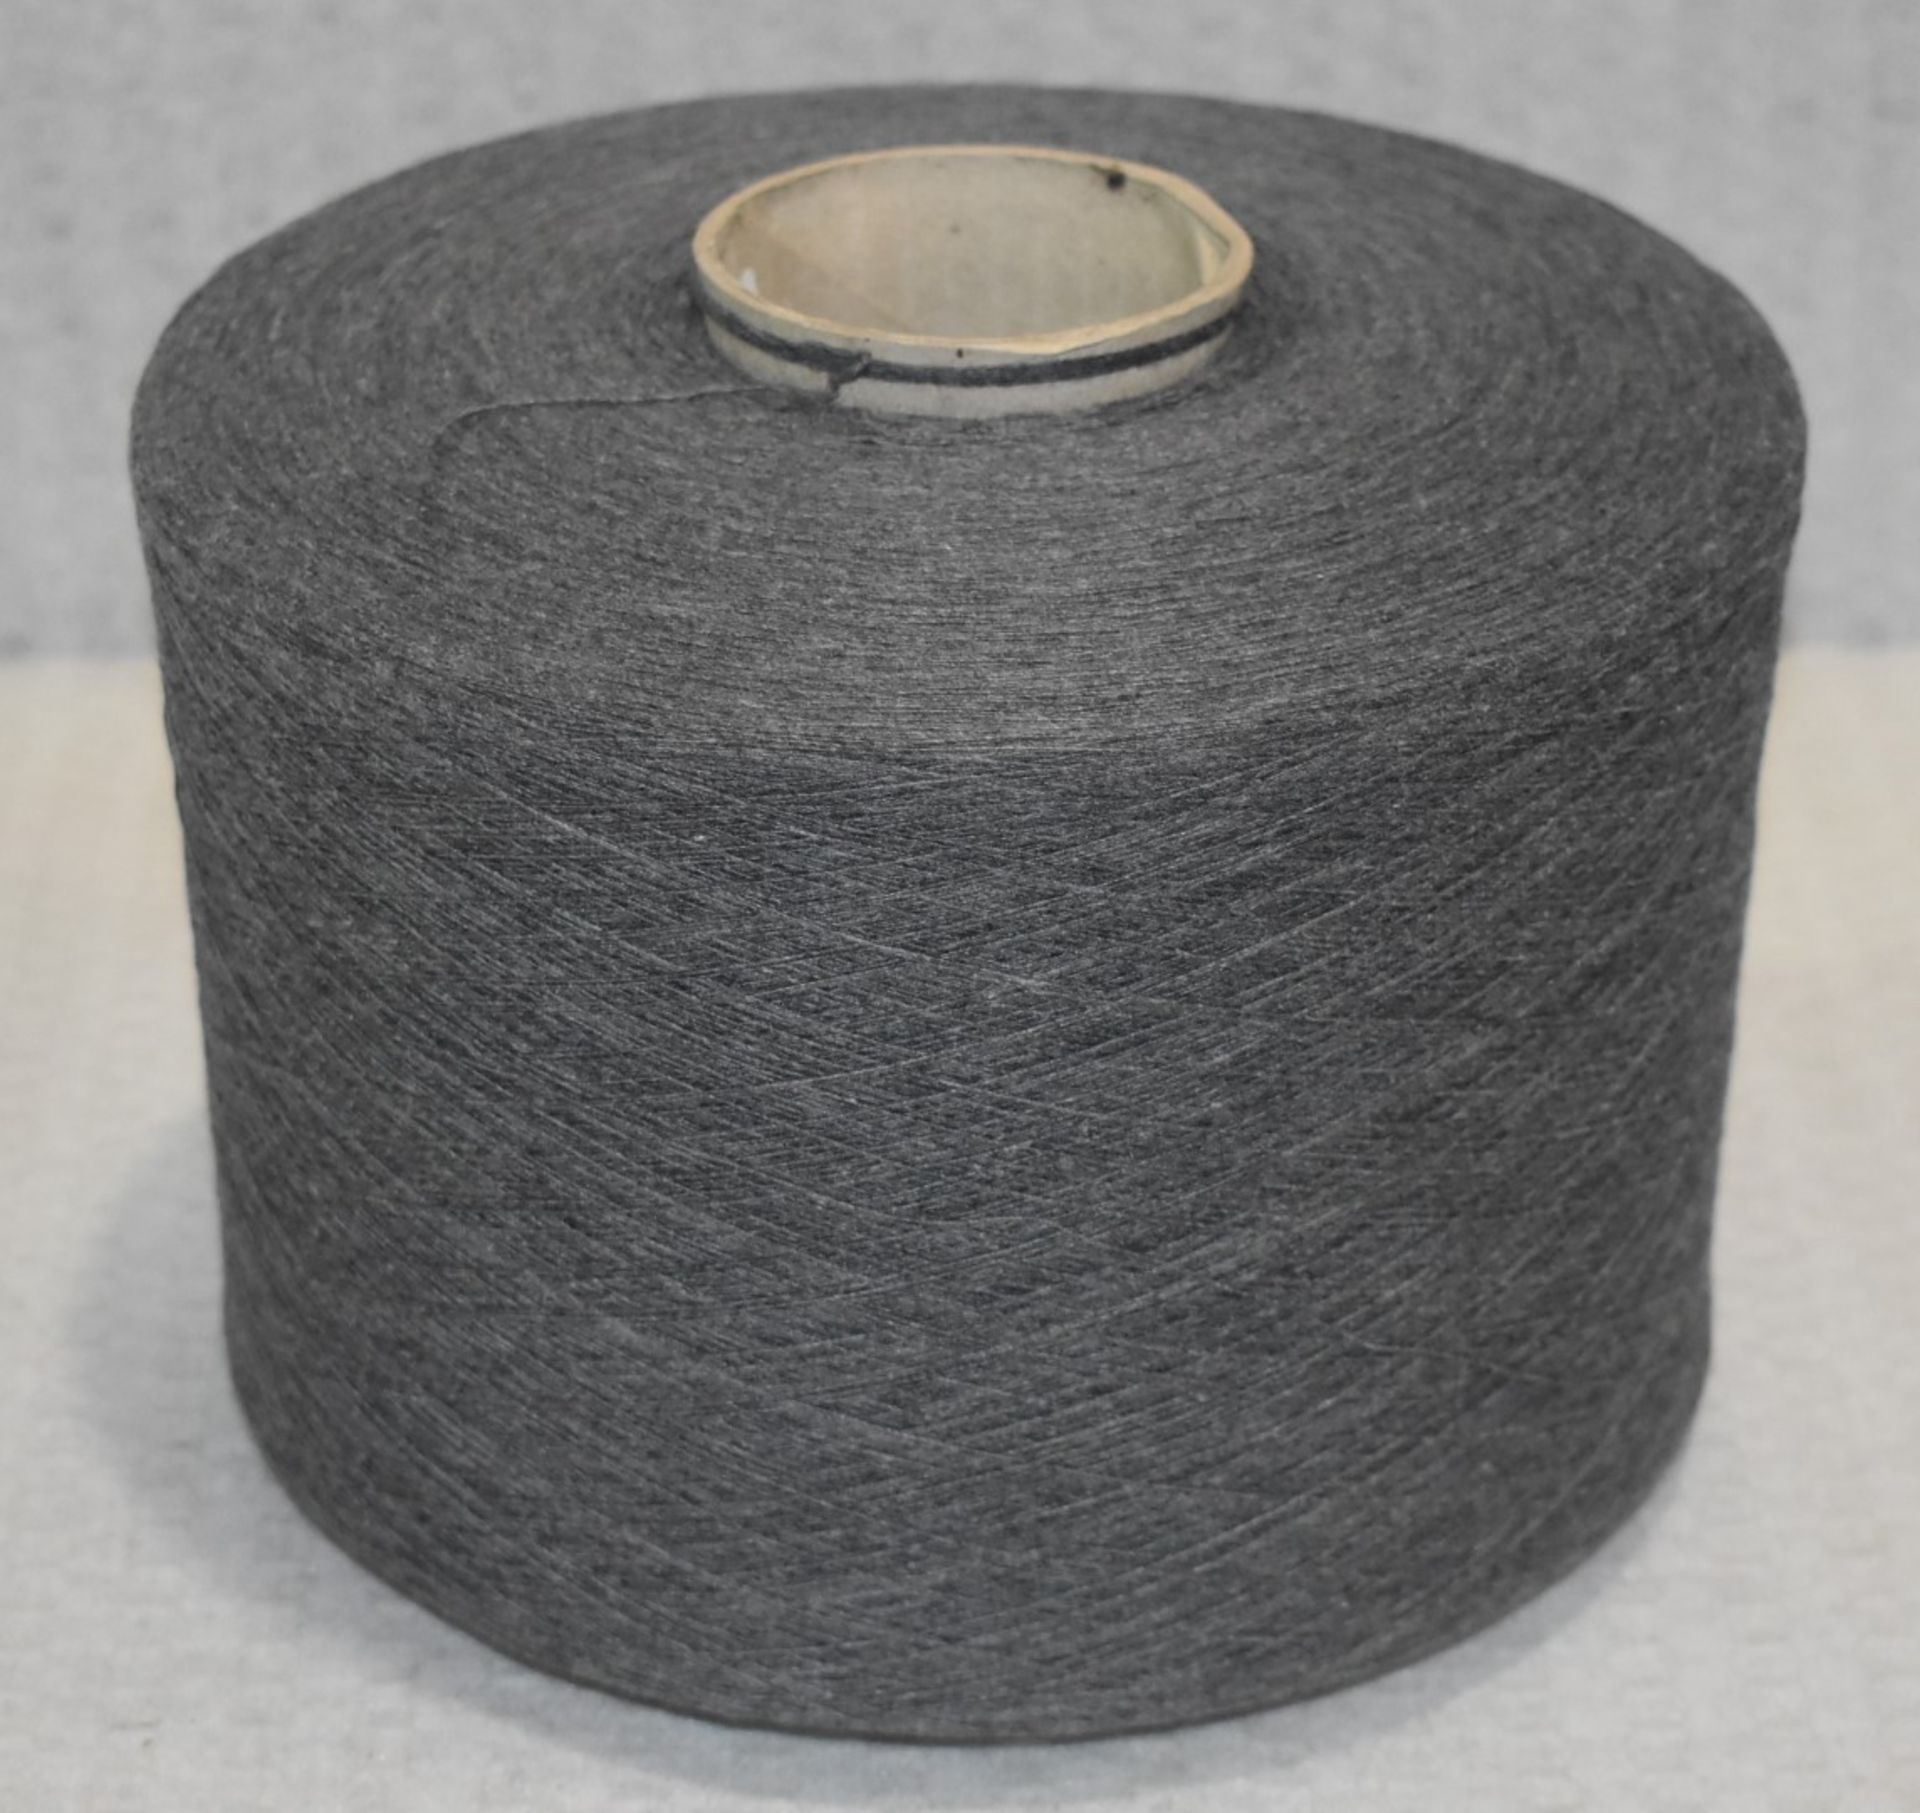 10 x Cones of 1/13 MicroCotton Knitting Yarn - Mid Grey - Approx Weight: 2,500g - New Stock ABL Yarn - Image 8 of 11